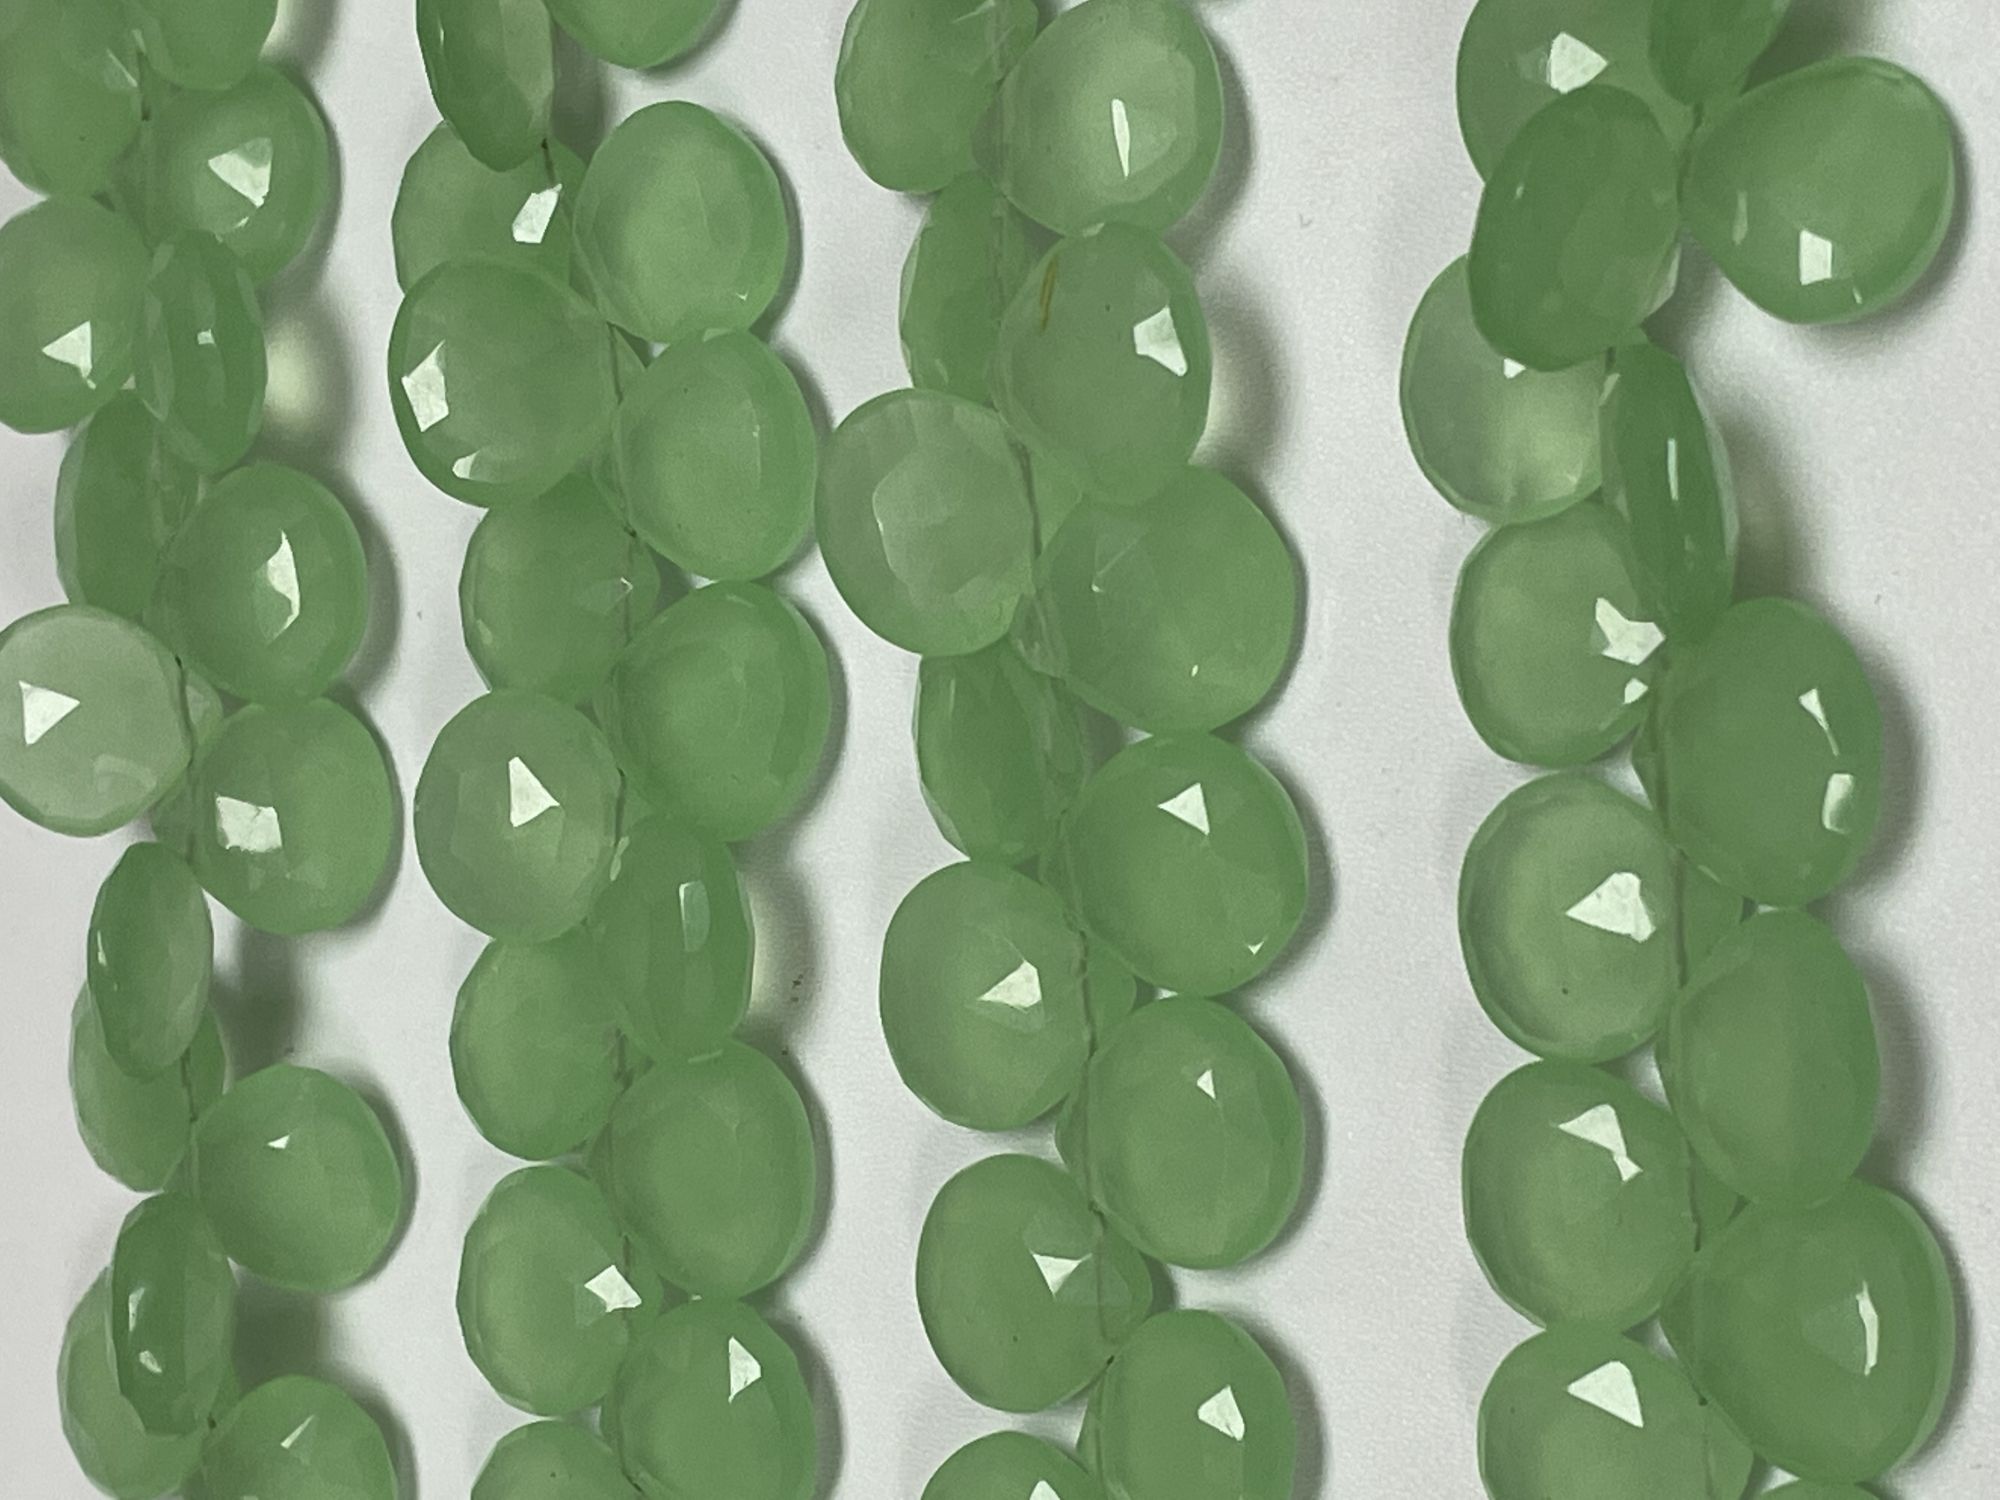 Green Chalcedony Heart Faceted